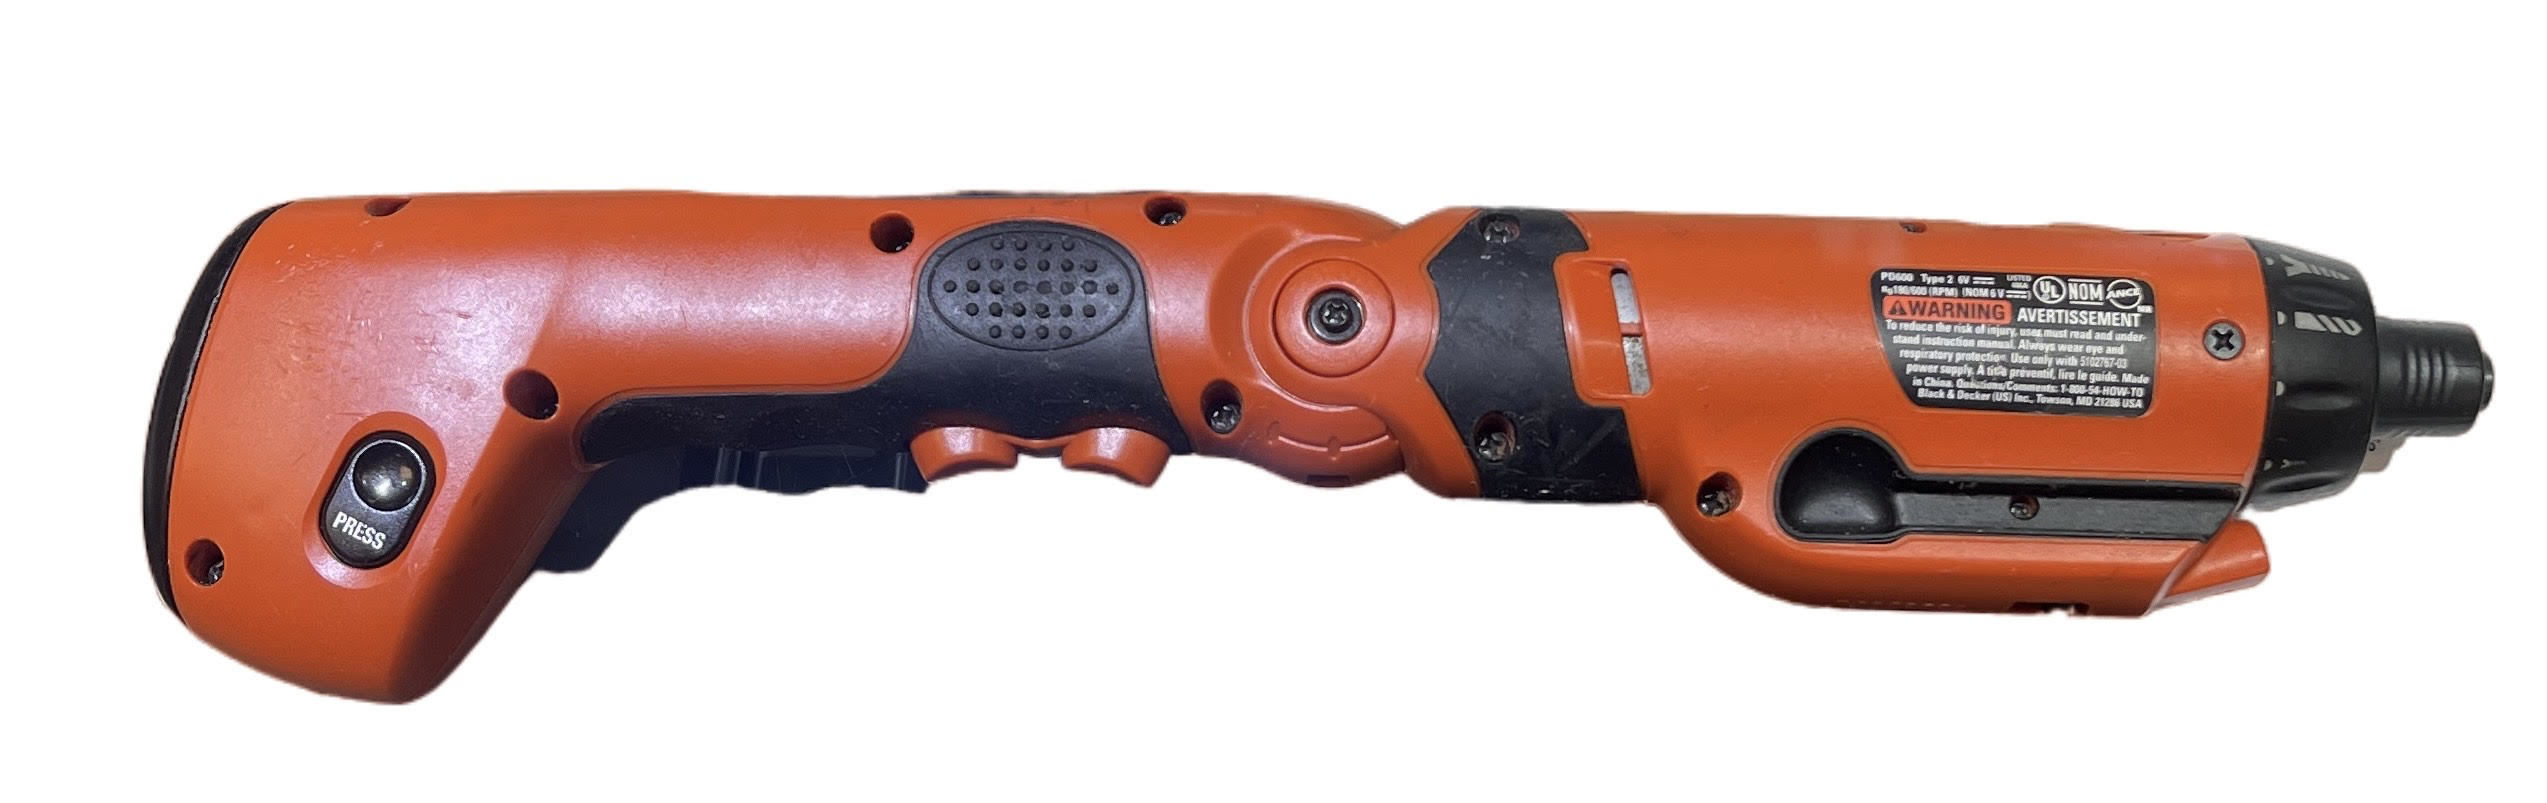 Black and Decker PD600 - Screwdriver Type 1 